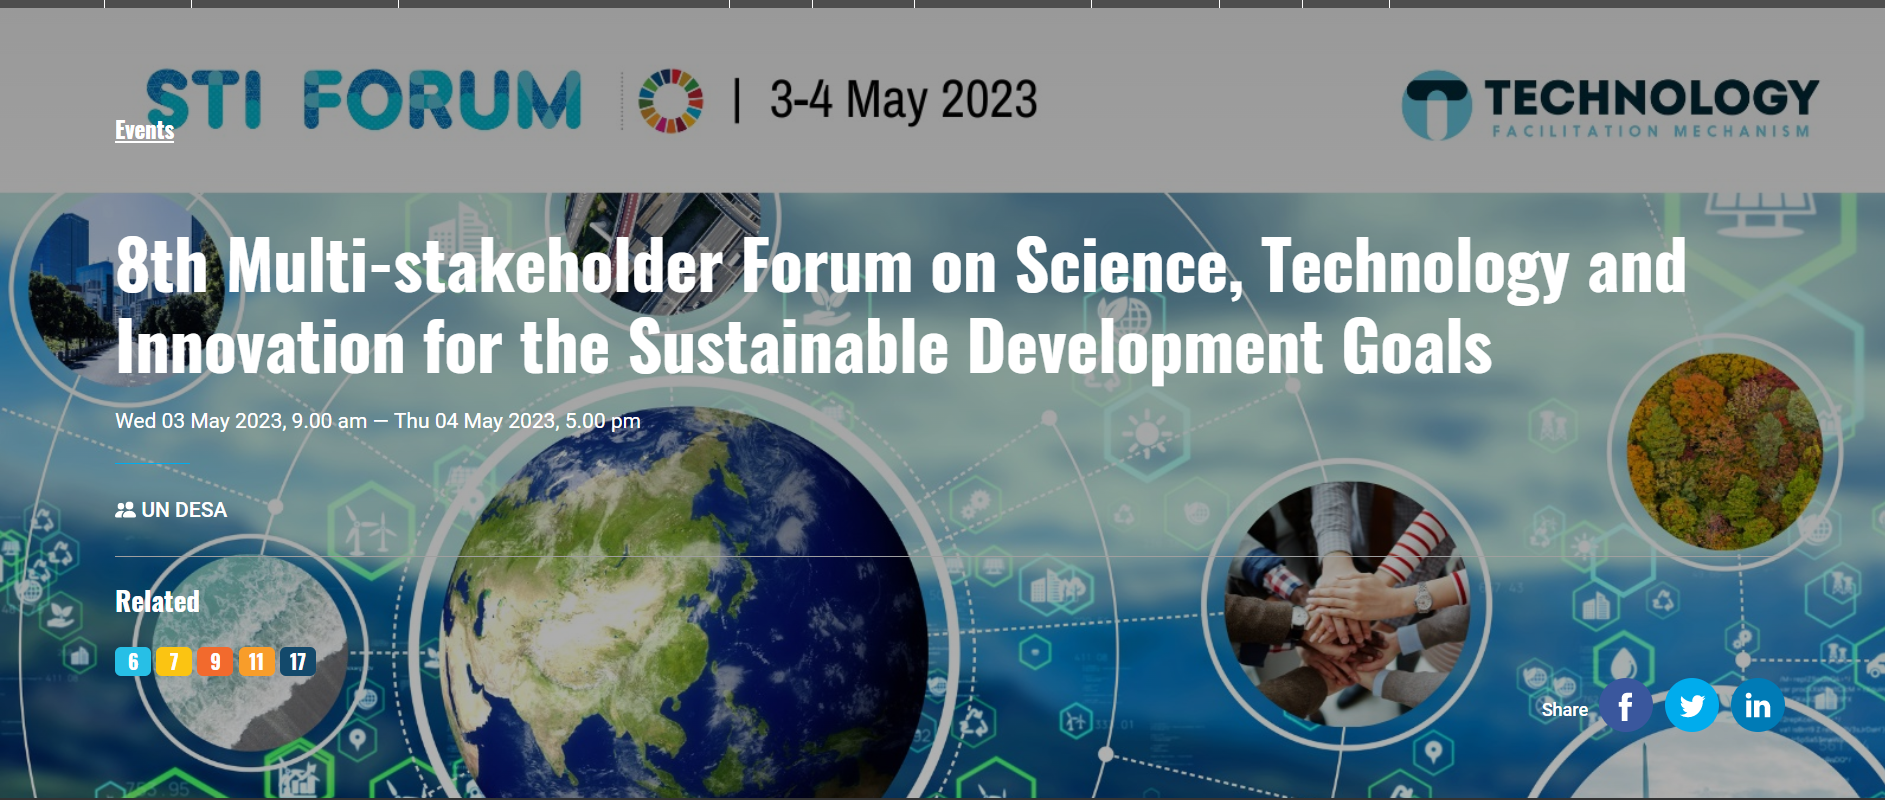 8th Multi-stakeholder Forum on Science, Technology and Innovation for the Sustainable Development Goals